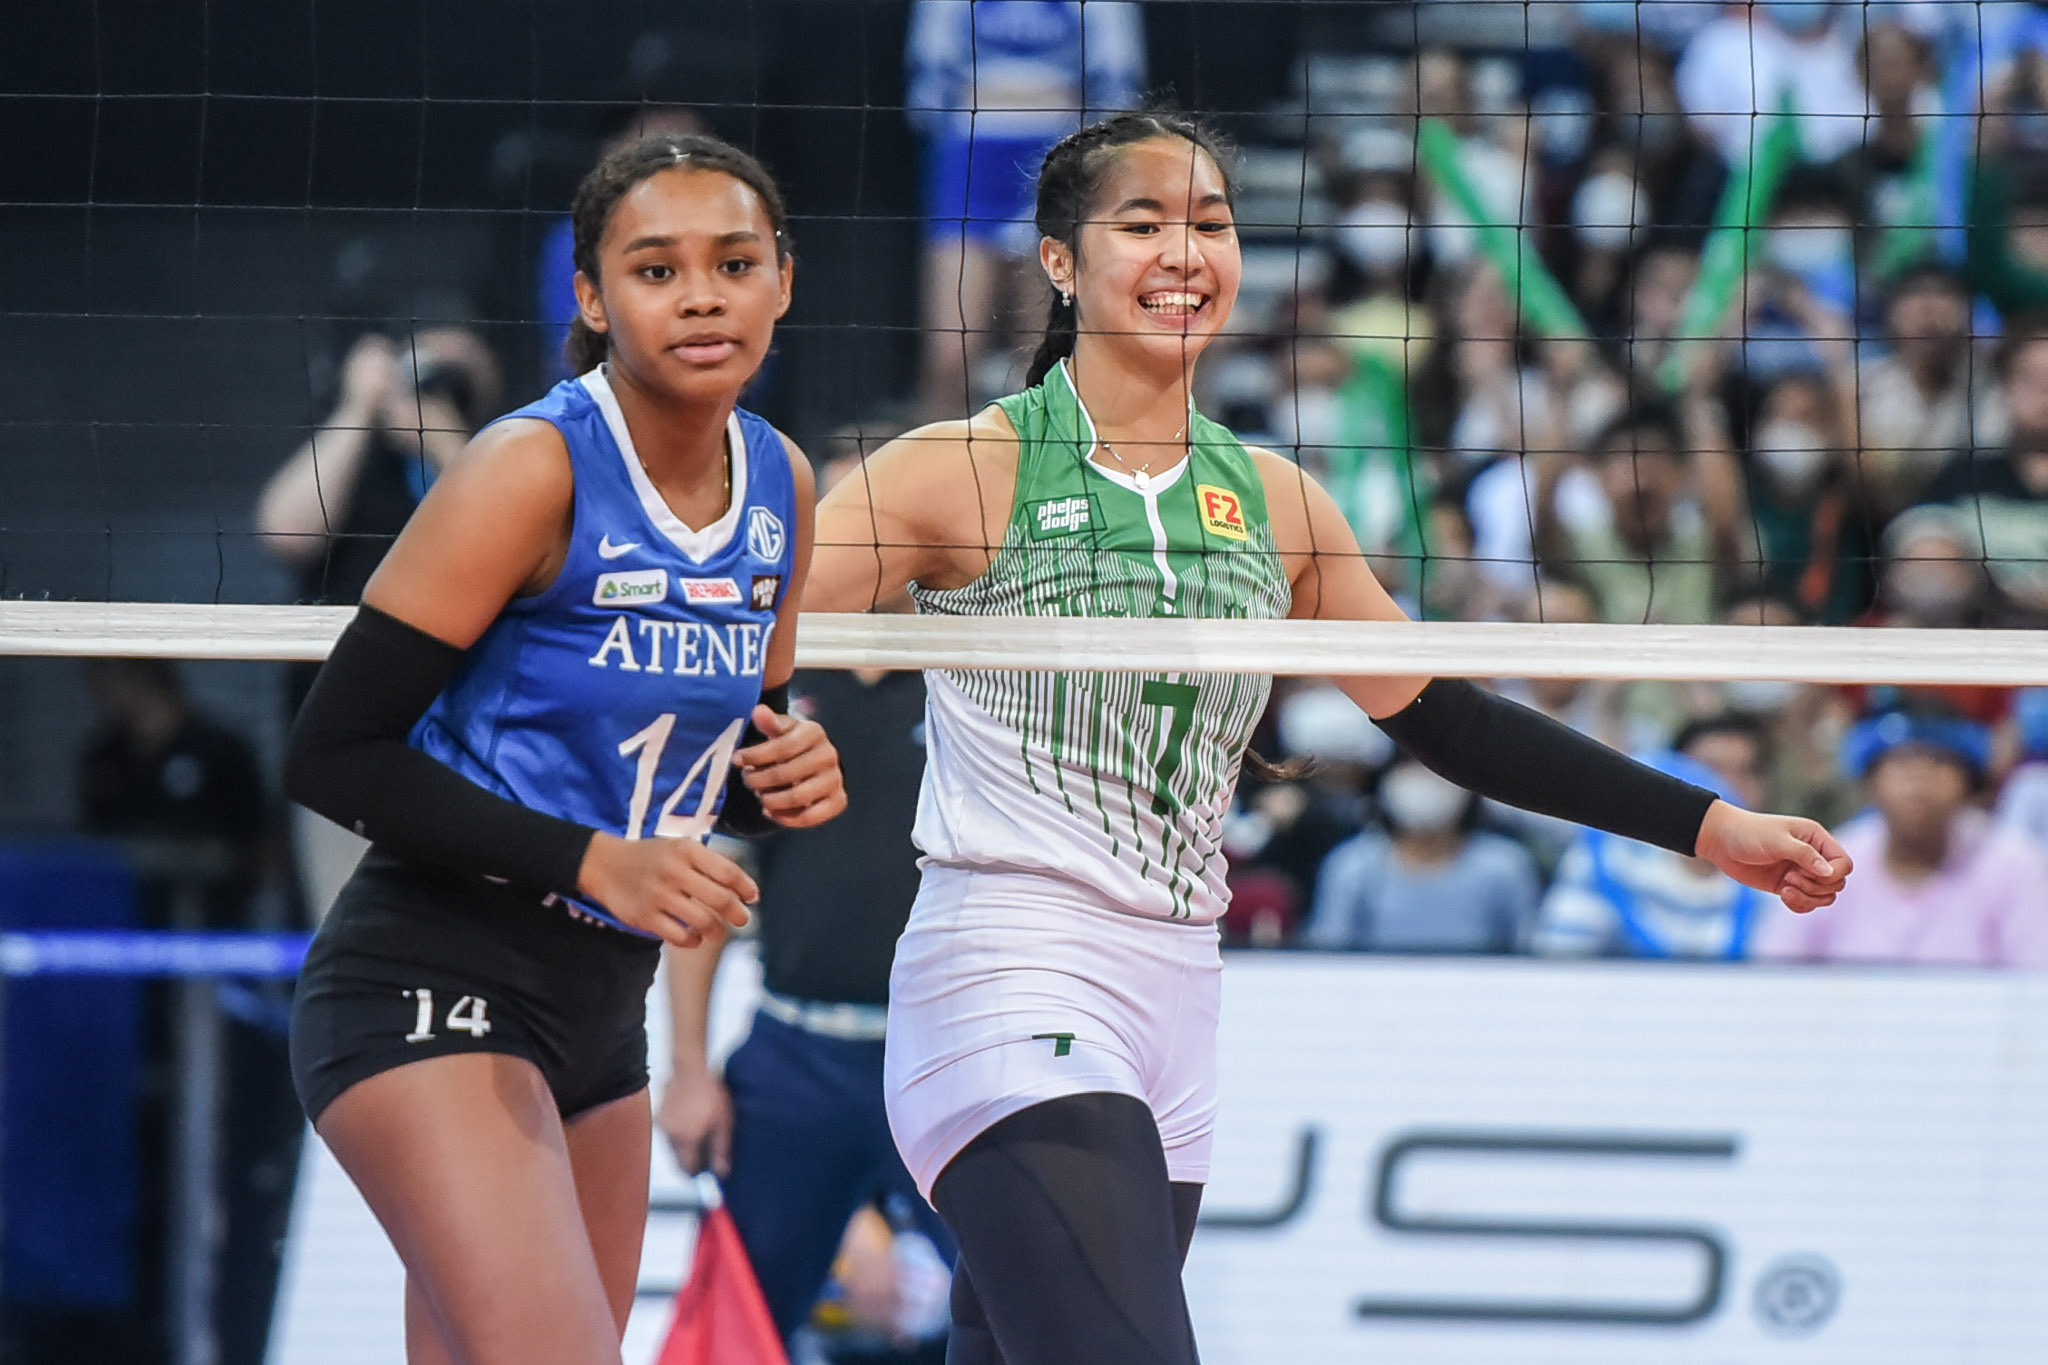 UAAP-85-WVB-DLSU-vs.-ADMU-Shevana-Laput-8216 From track and field to volleyball: Angel Canino proud of Shevana Laput's rise DLSU News UAAP Volleyball  - philippine sports news